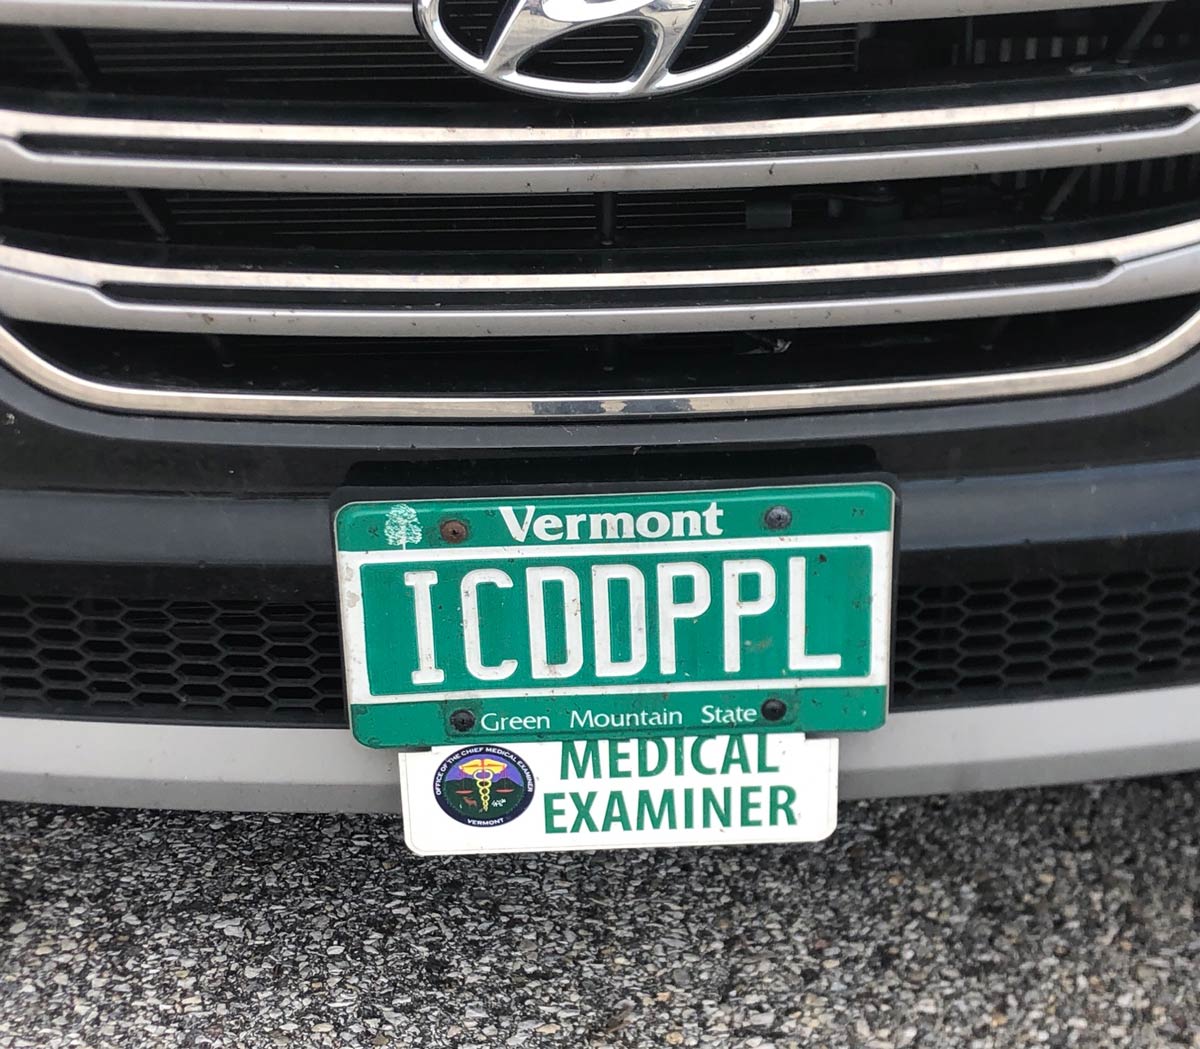 This medical examiner’s license plate